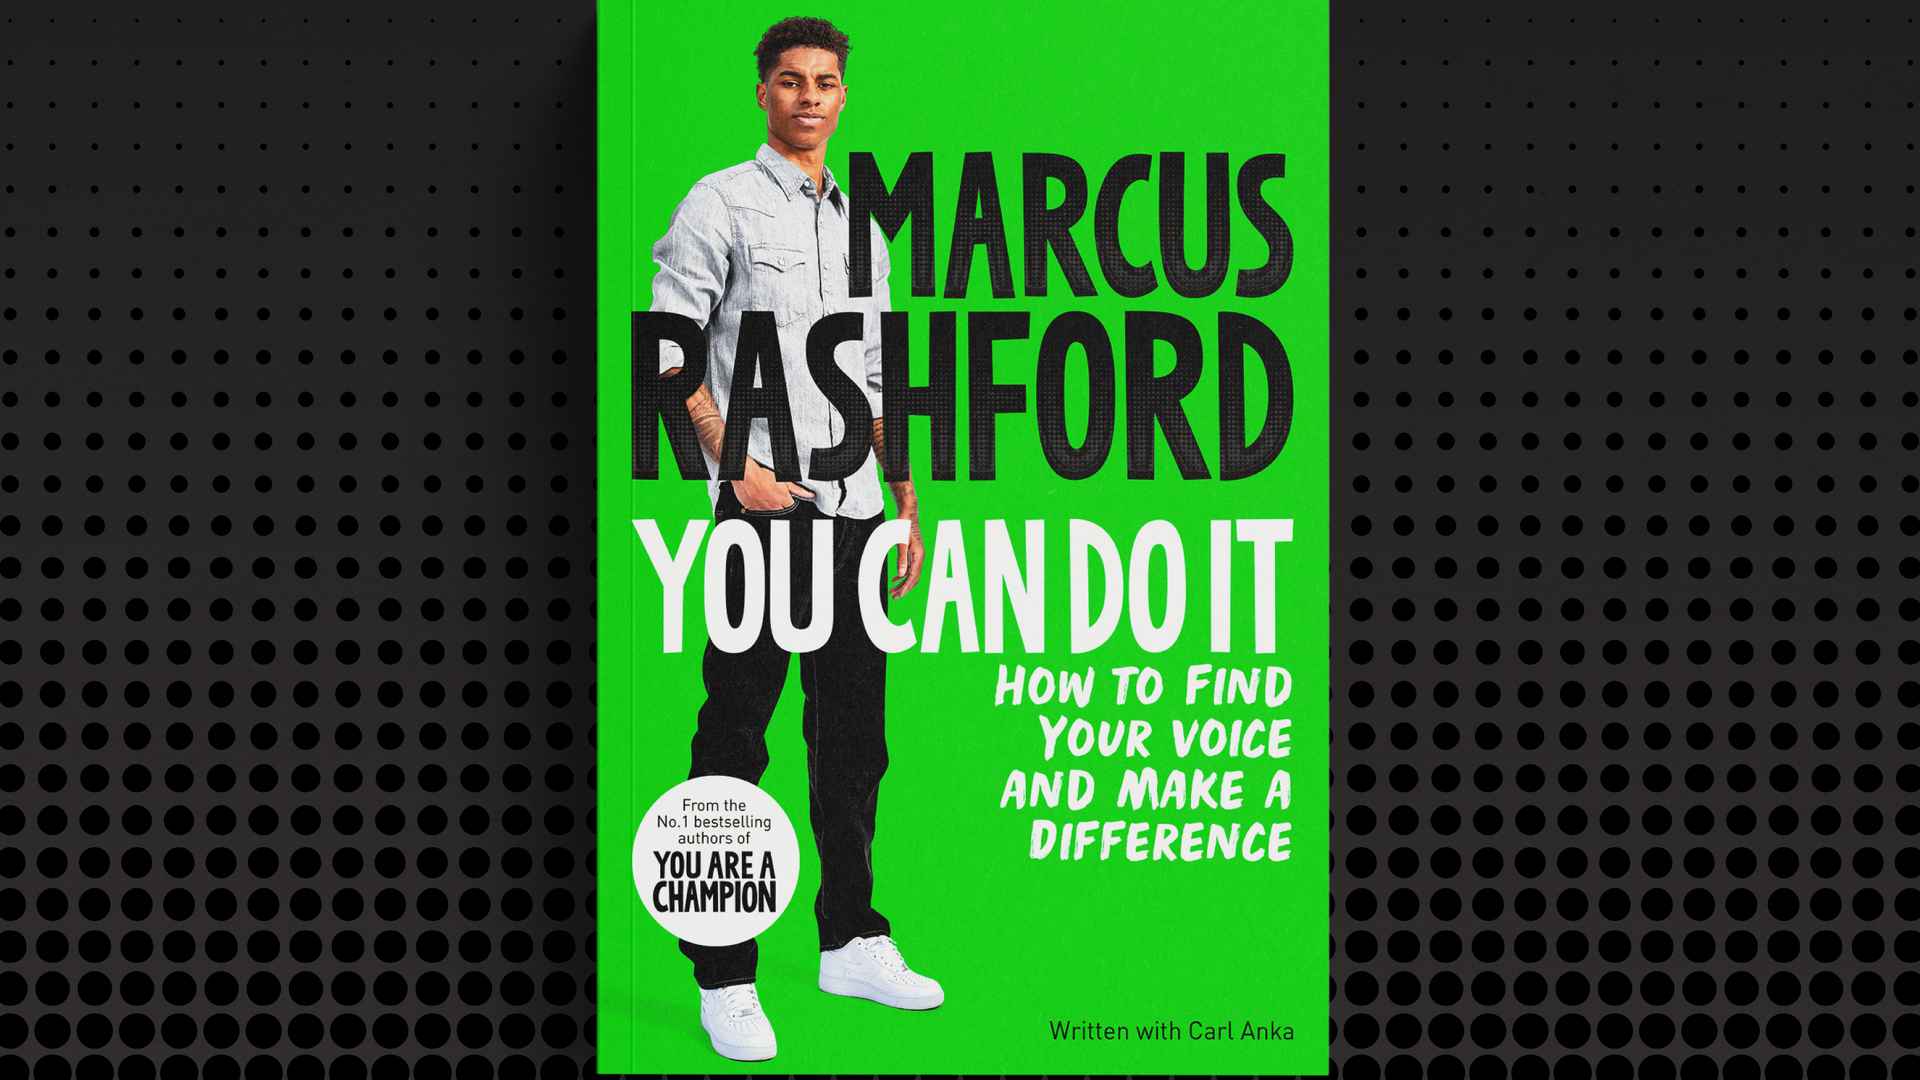 Marcus Rashford releases new book 'You Can Do It' | Manchester United